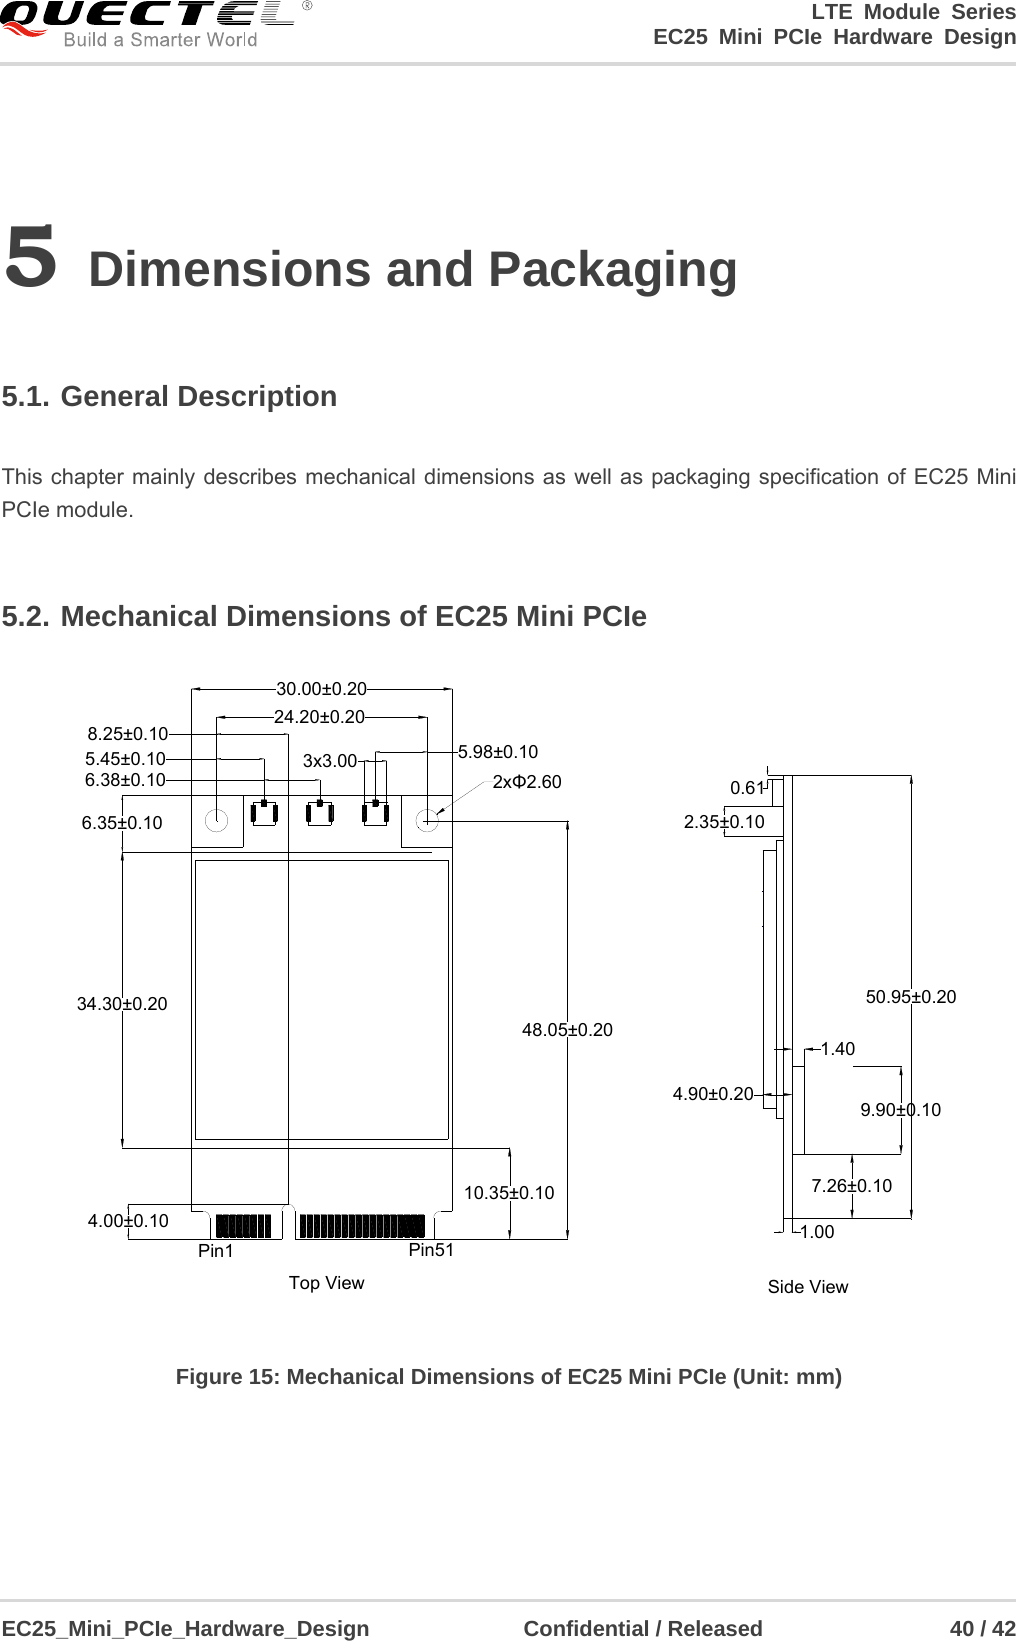                                        LTE Module Series                                                  EC25 Mini PCIe Hardware Design  EC25_Mini_PCIe_Hardware_Design              Confidential / Released                 40 / 42    5 Dimensions and Packaging  5.1. General Description  This chapter mainly describes mechanical dimensions as well as packaging specification of EC25 Mini PCIe module.  5.2. Mechanical Dimensions of EC25 Mini PCIe 10.35±0.1034.30±0.204.00±0.1048.05±0.206.35±0.103x3.00 5.98±0.106.38±0.105.45±0.108.25±0.10 24.20±0.2030.00±0.20Pin1 Pin51Top View1.007.26±0.101.404.90±0.200.612.35±0.1050.95±0.209.90±0.10Side View2xΦ2.60 Figure 15: Mechanical Dimensions of EC25 Mini PCIe (Unit: mm)   